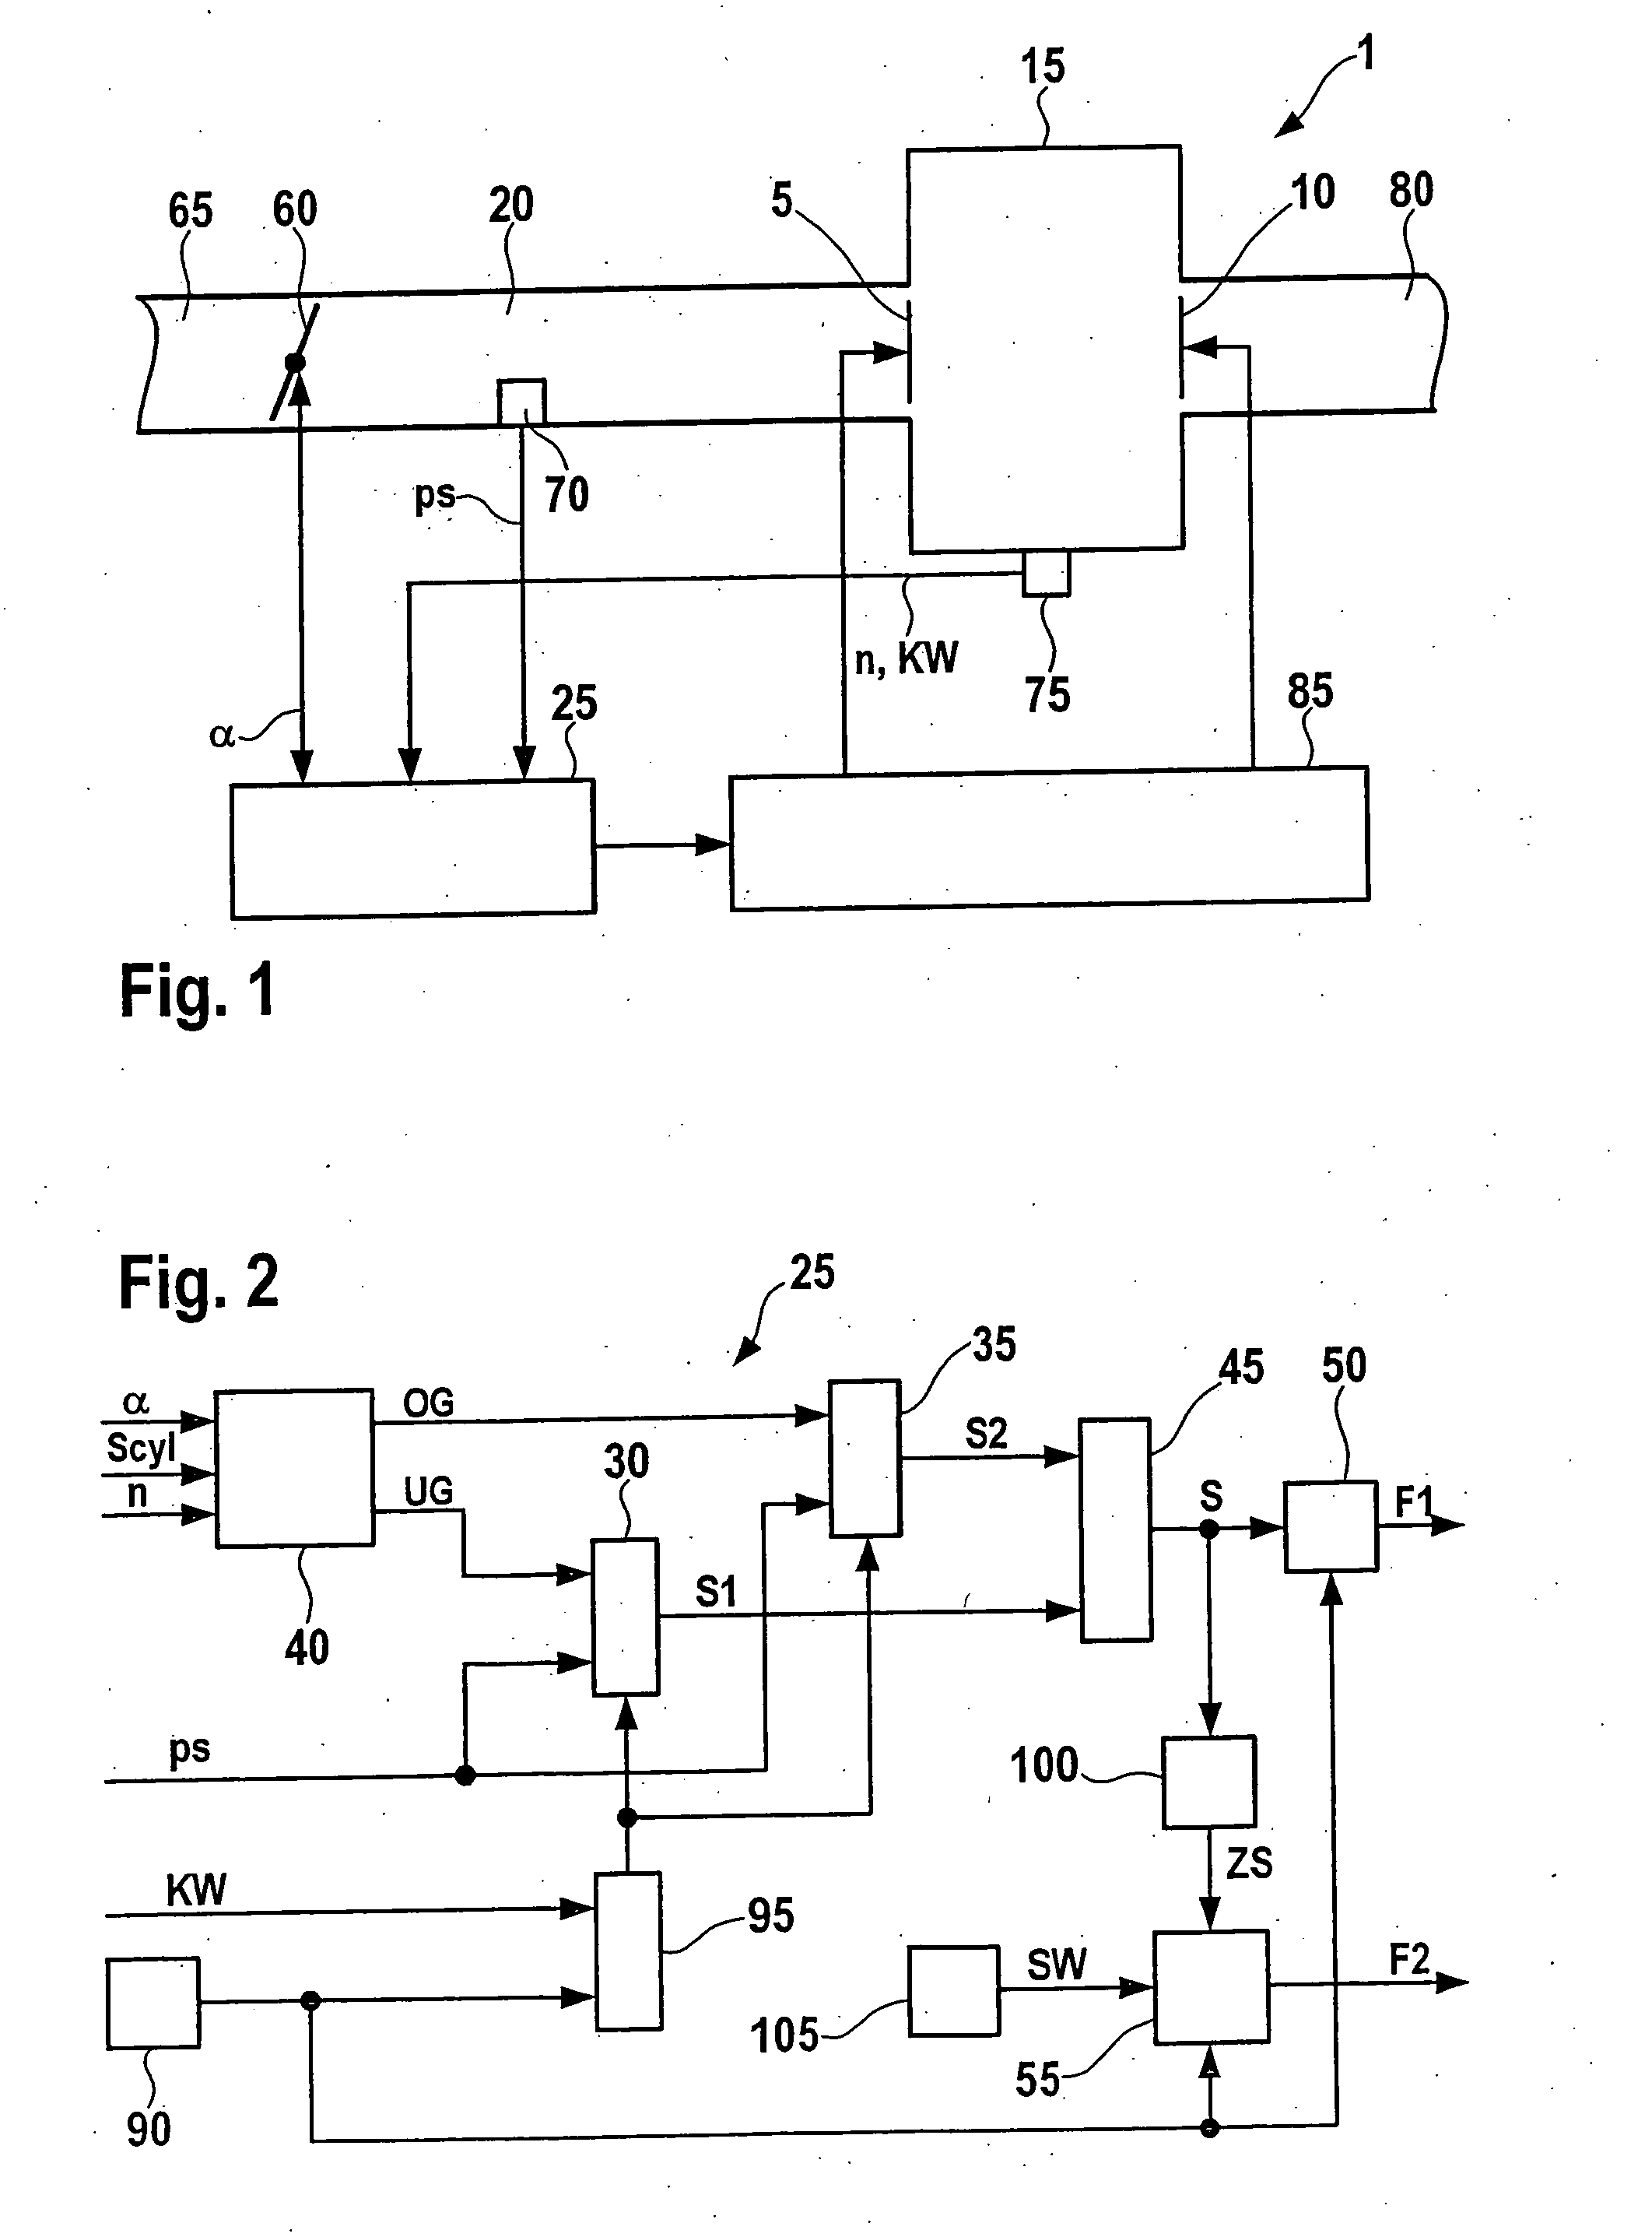 Device and method for monitoring the intake manifold pressure of an internal combustion engine